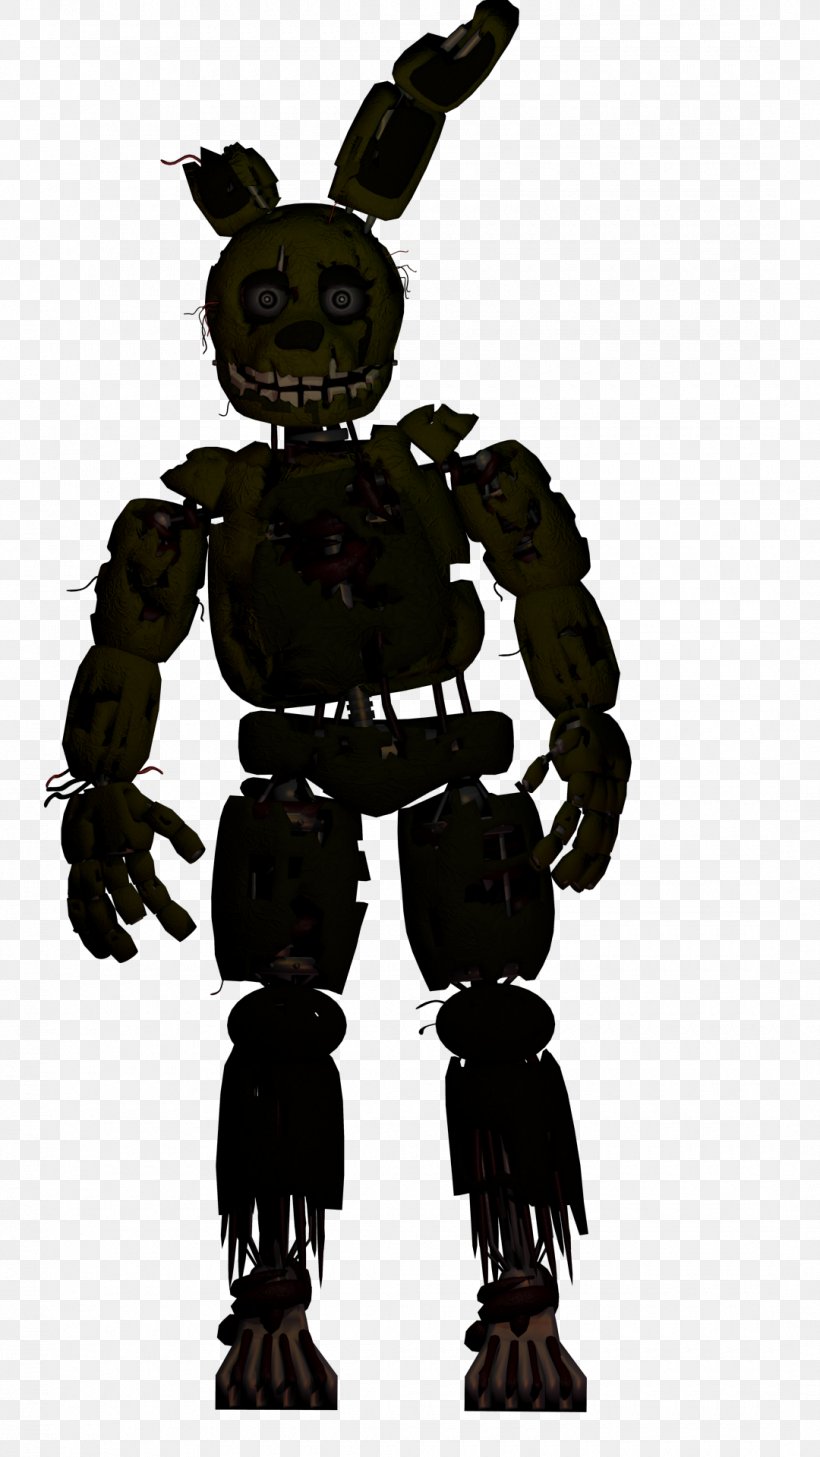 Five Nights At Freddy's 3 Five Nights At Freddy's 4 Freddy Fazbear's Pizzeria Simulator Five Nights At Freddy's 2, PNG, 1080x1920px, Animatronics, Cutting Room Floor, Drink, Fictional Character, Game Download Free